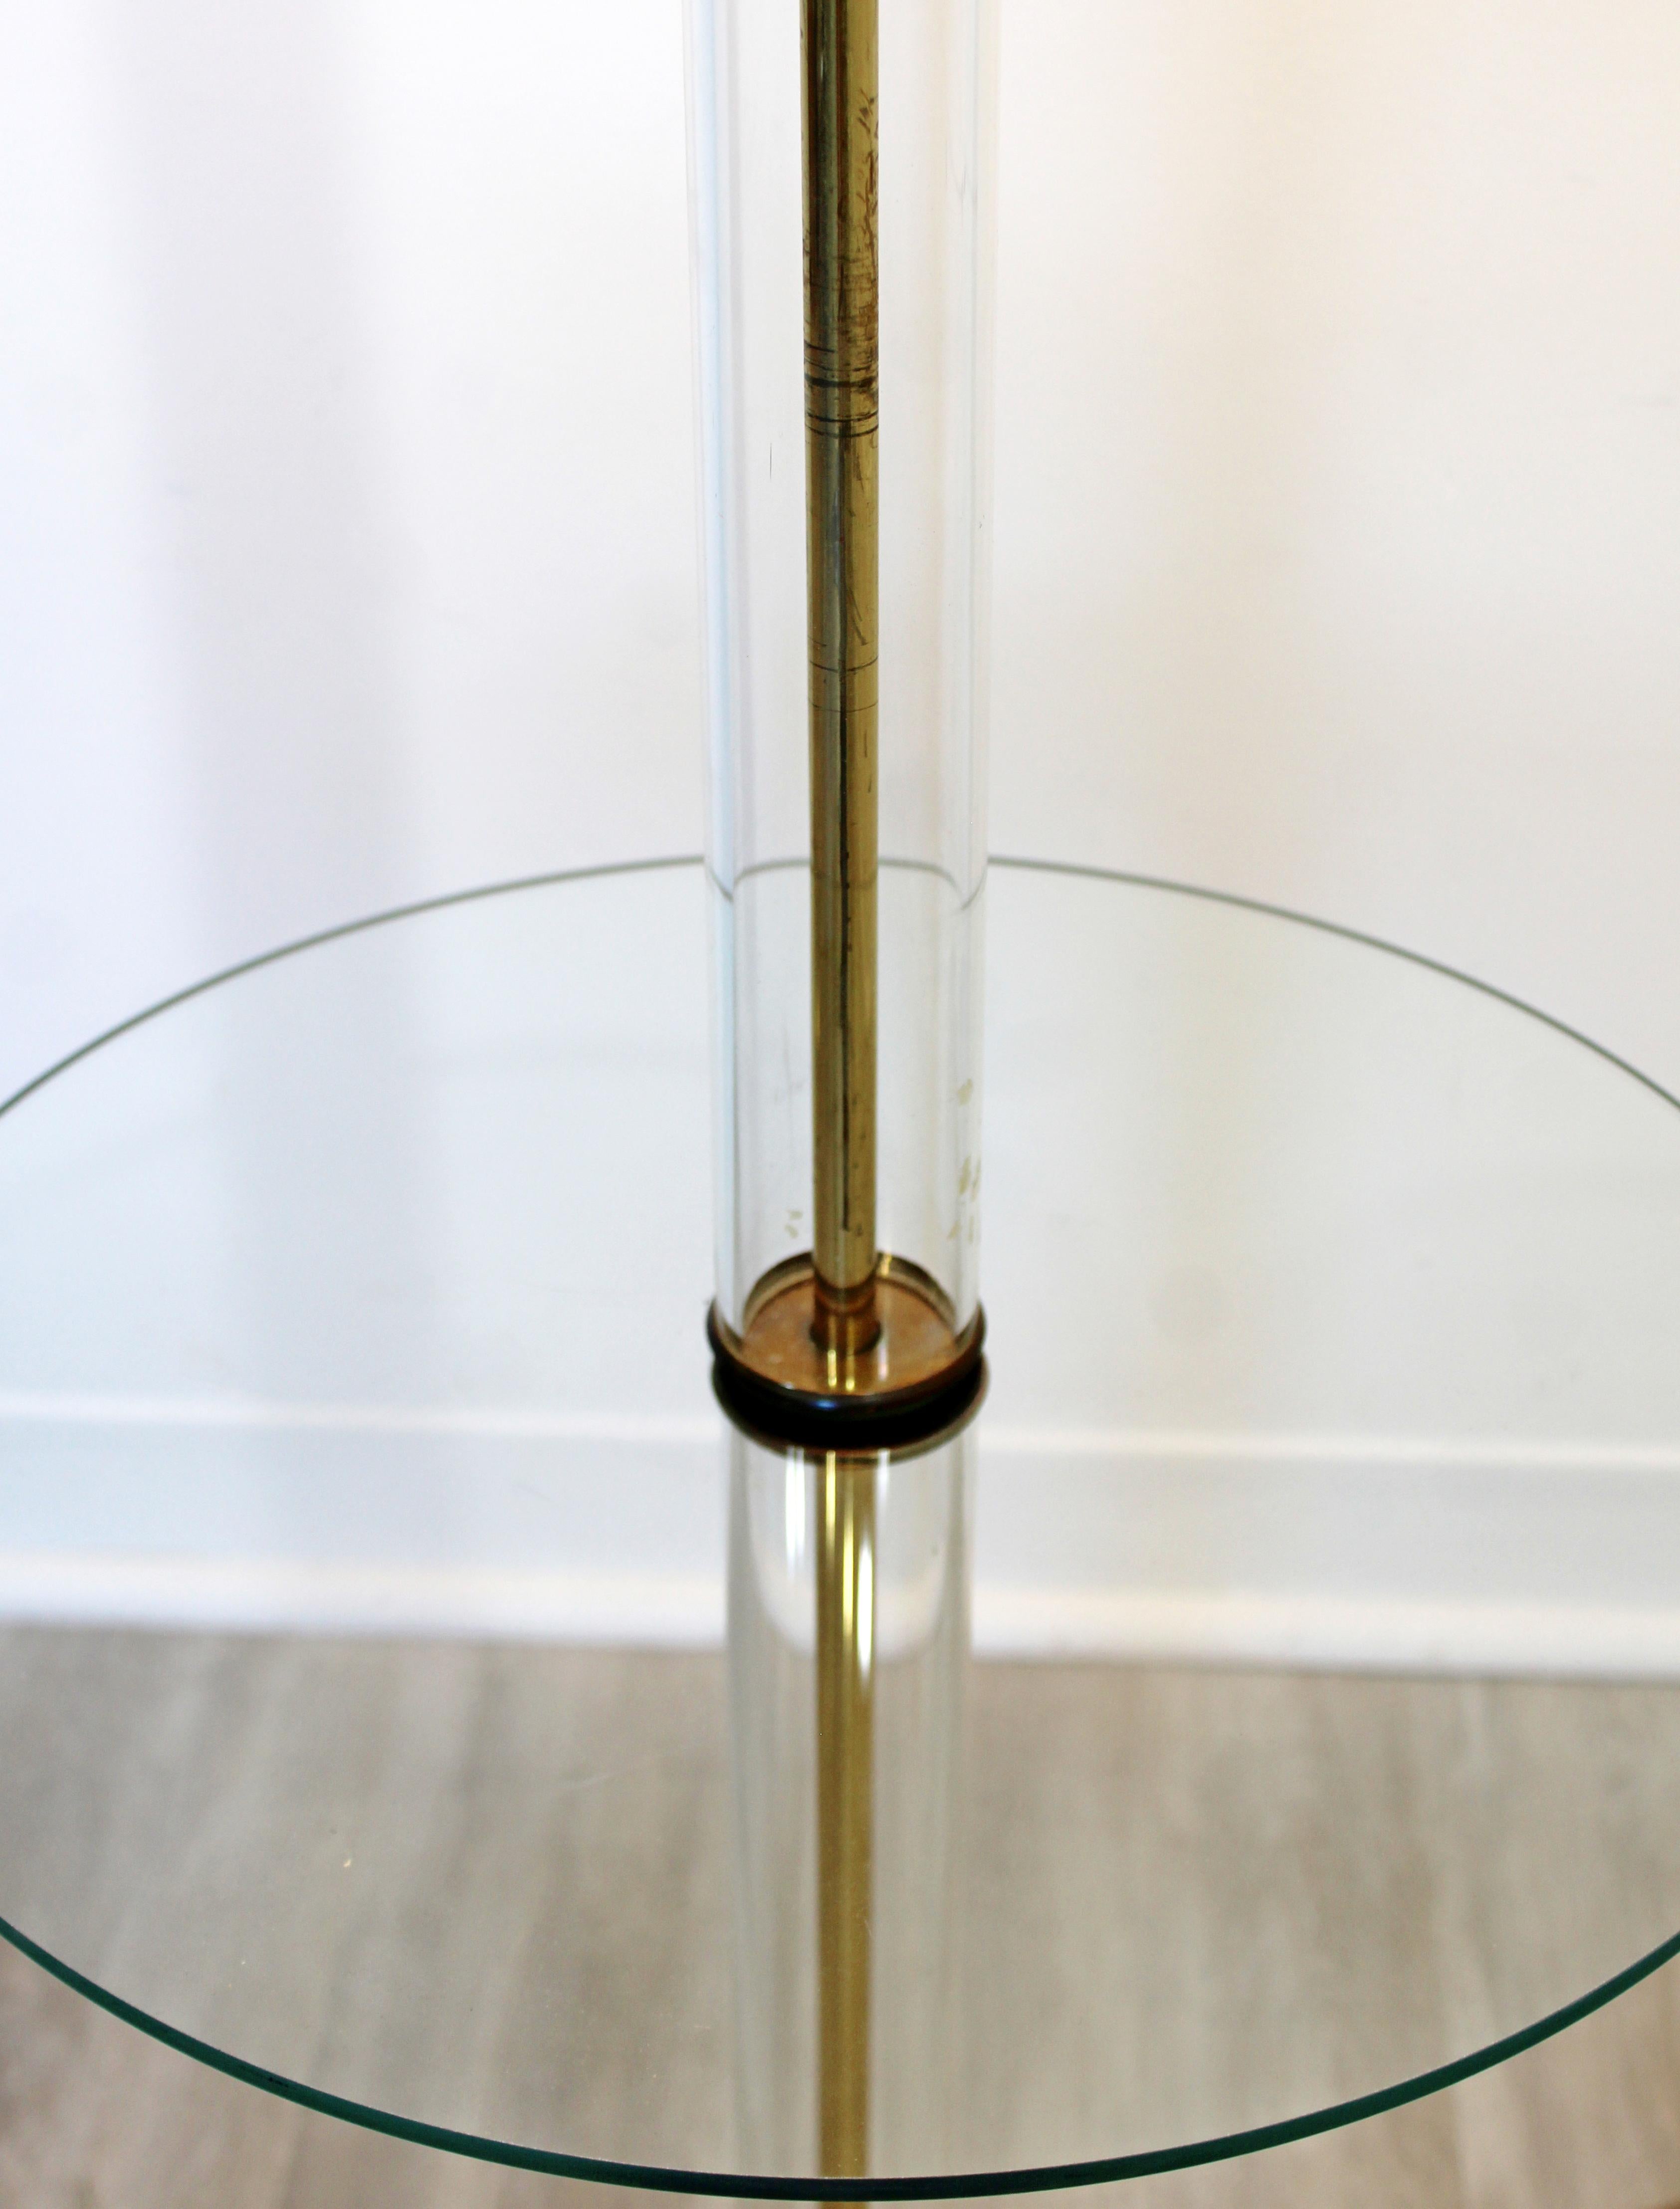 For your consideration is a fabulous, glass encased brass floor lamp, with glass table attached, with the original shade and finial, circa 1960s. In very good vintage condition. The dimensions are 19